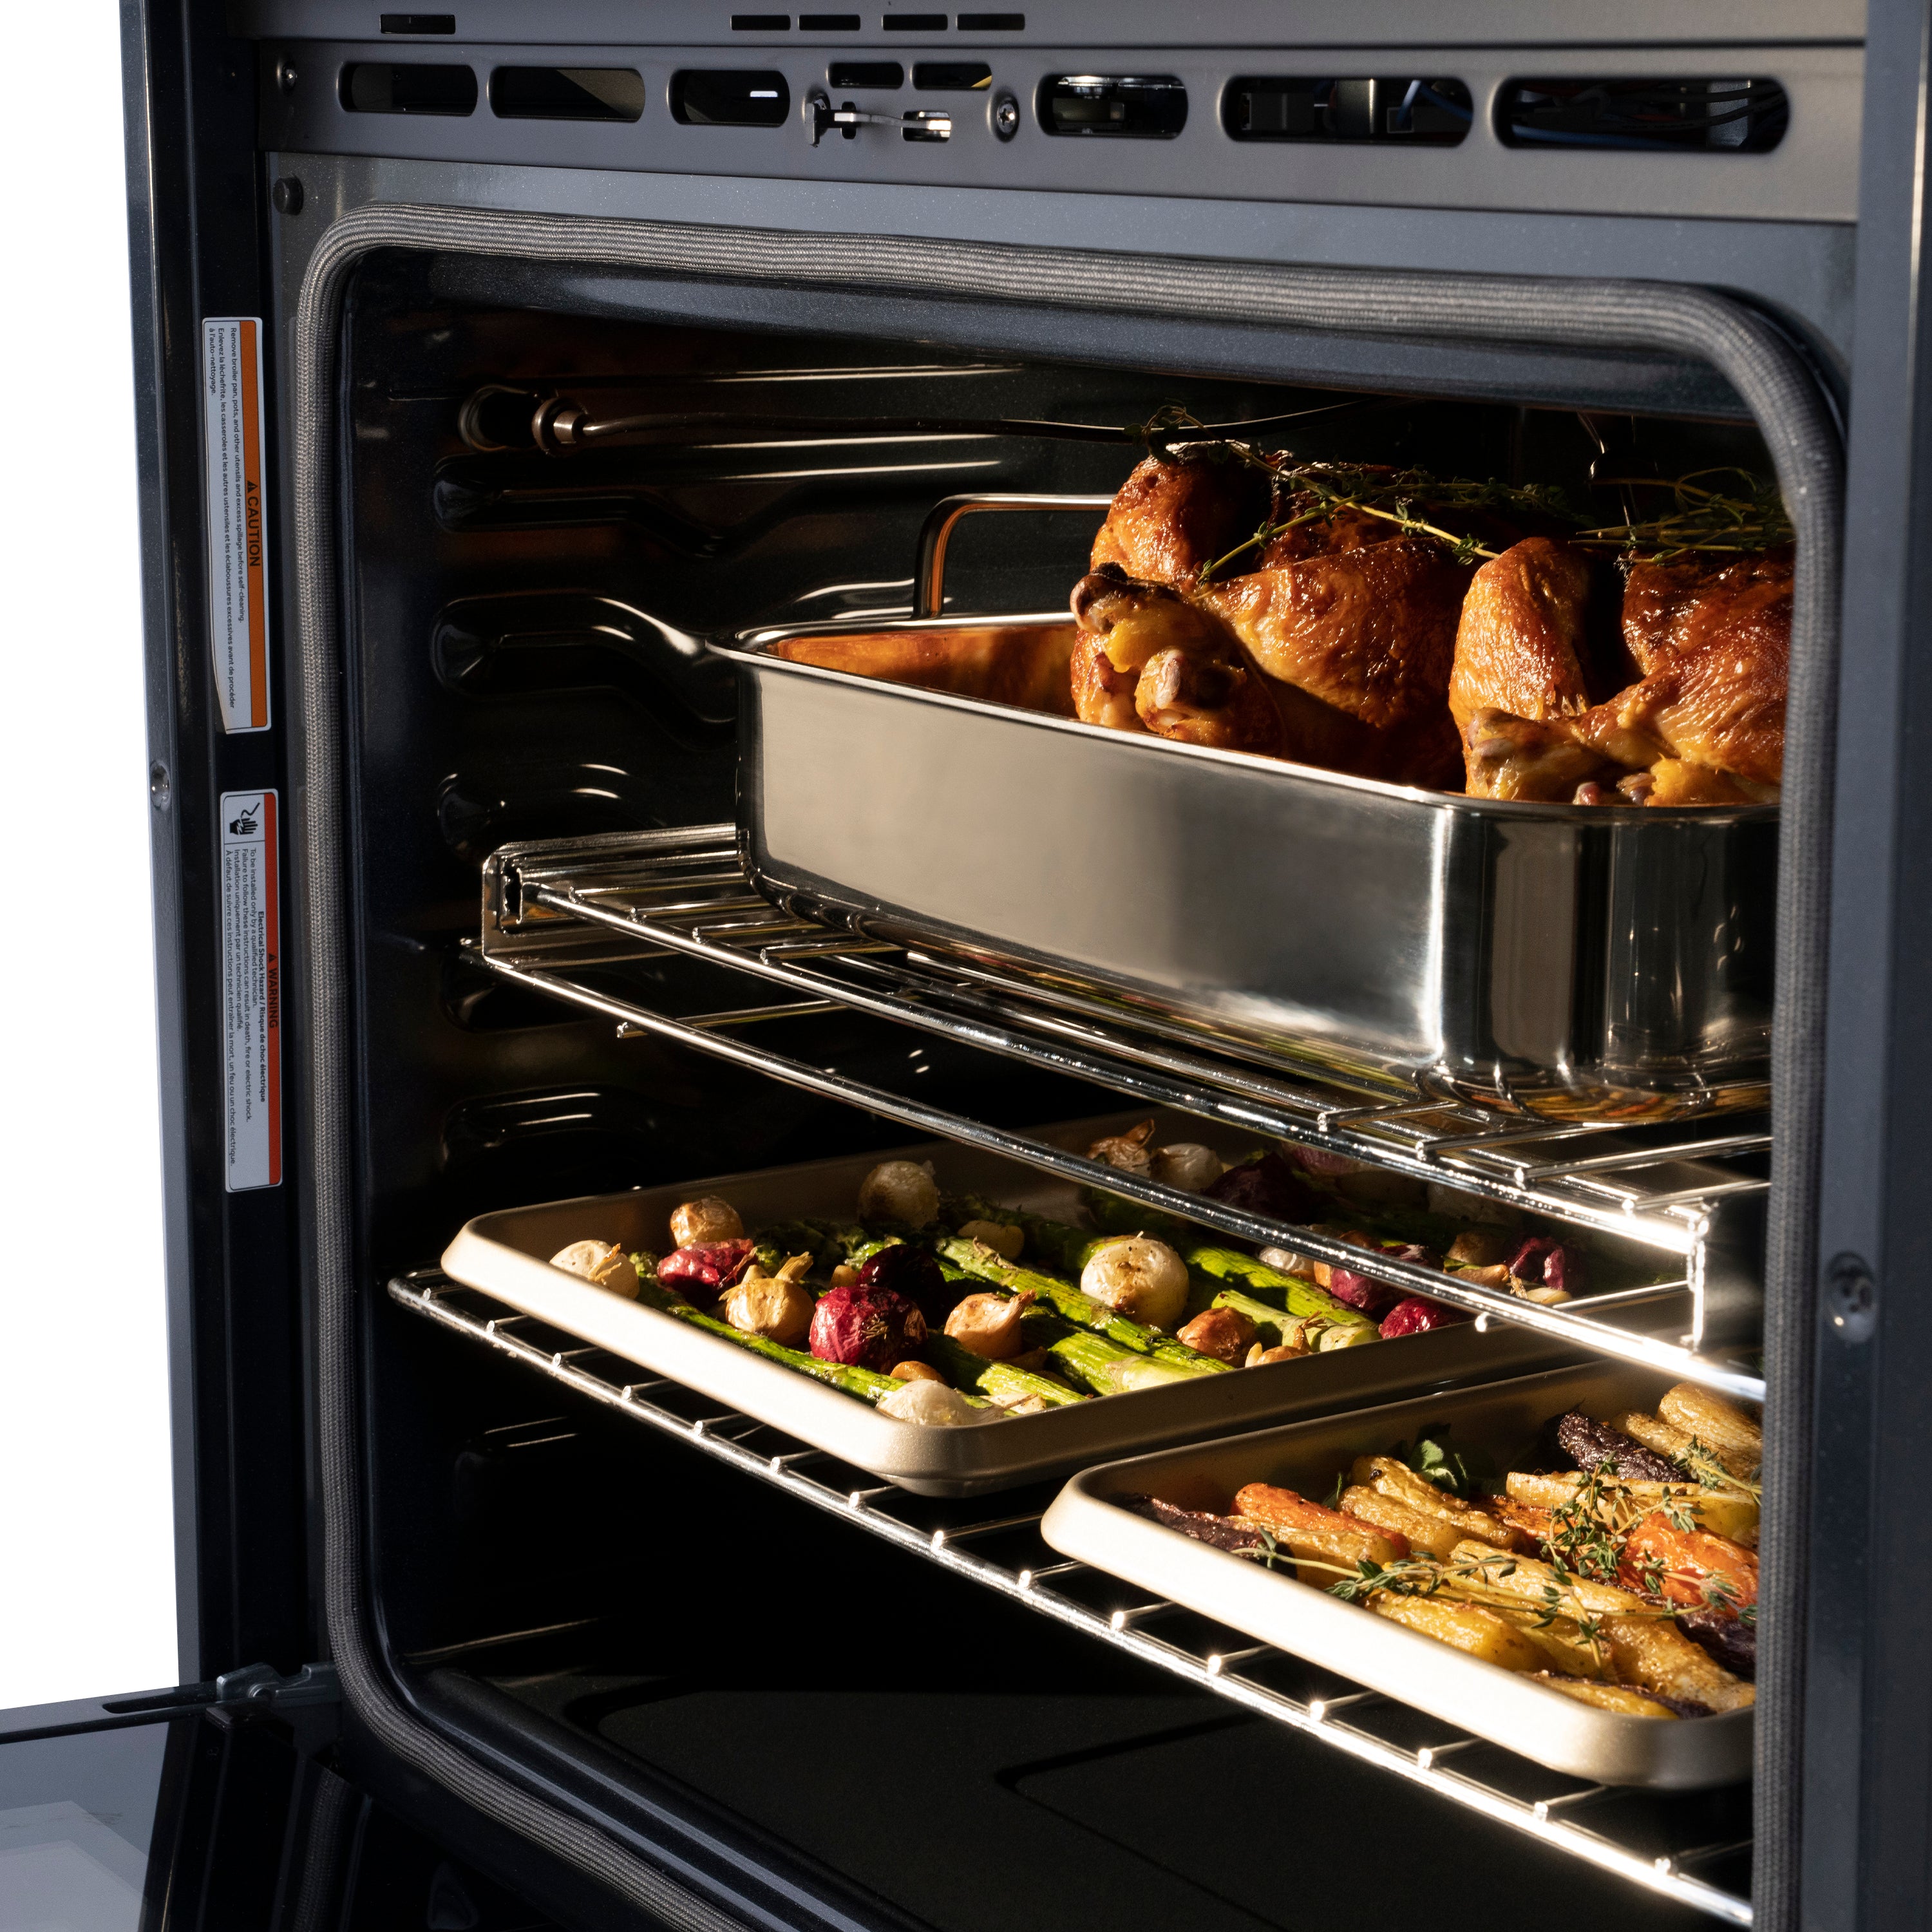 ZLINE 30" Professional Double Wall Oven with Self Clean and True Convection in Stainless Steel (AWD-30)